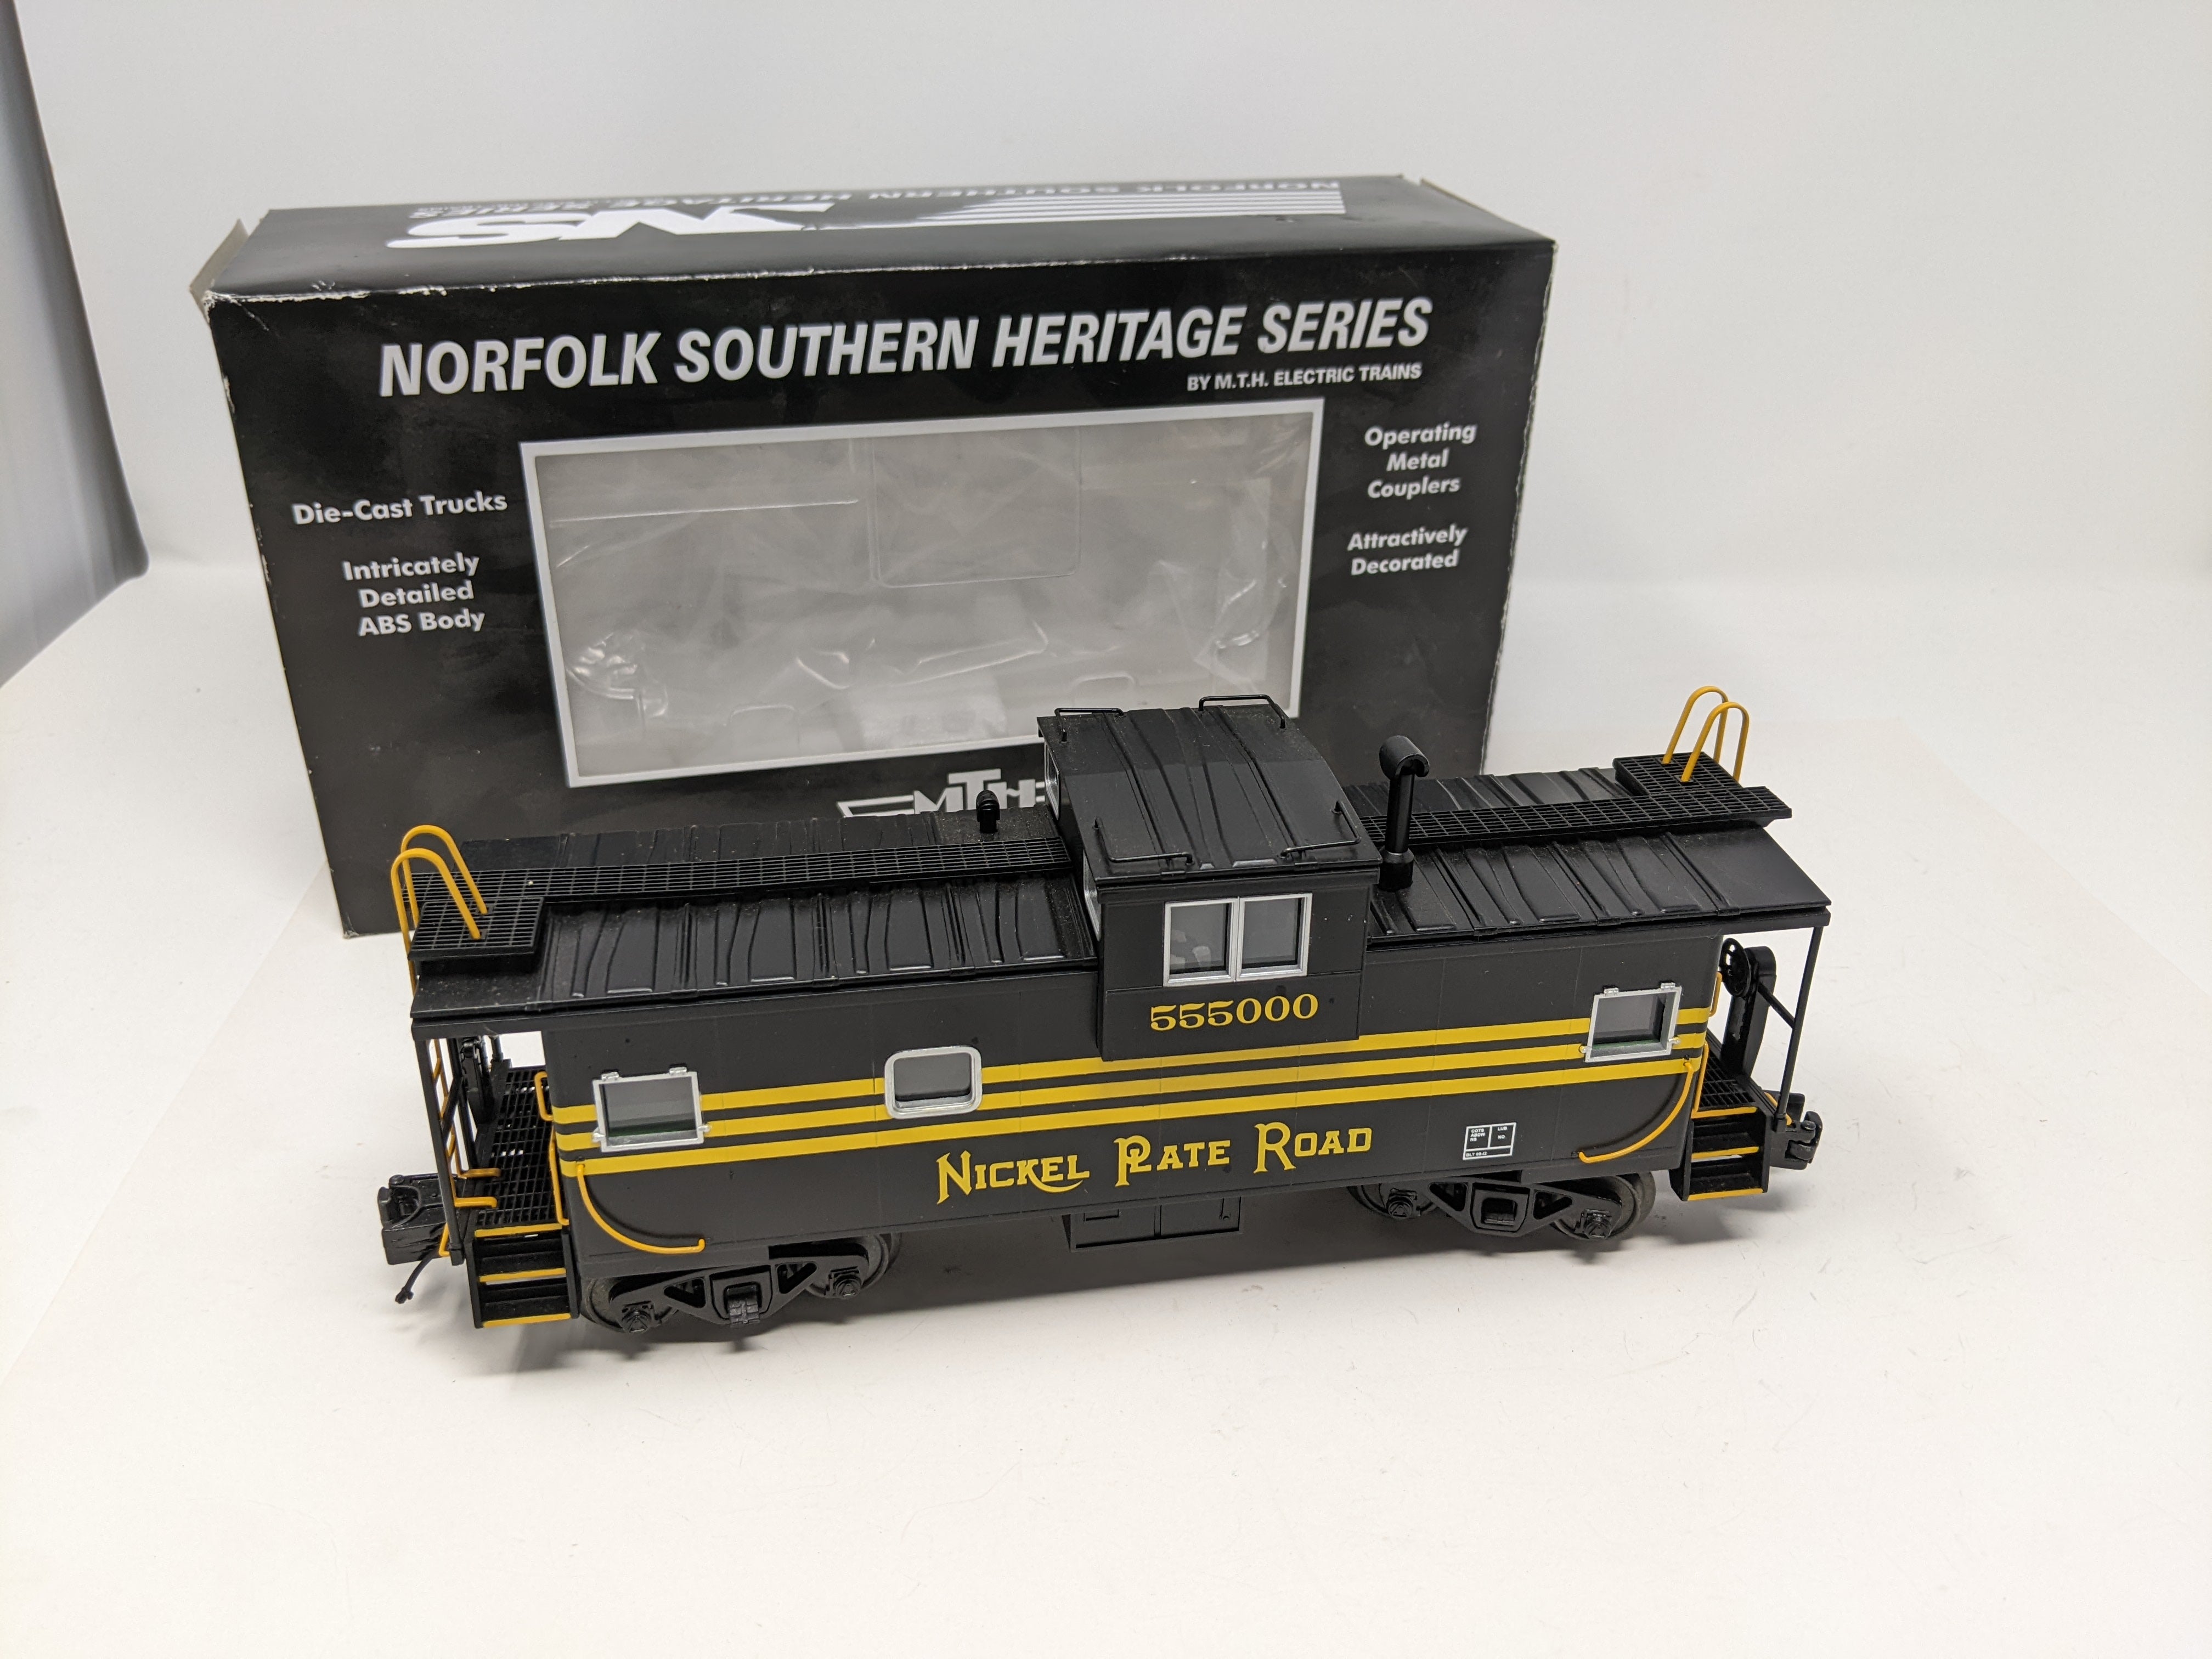 USED MTH Premier 20-91391 O, Extended Vision Caboose NS Heritage Series, Nickel Plate Road #555000